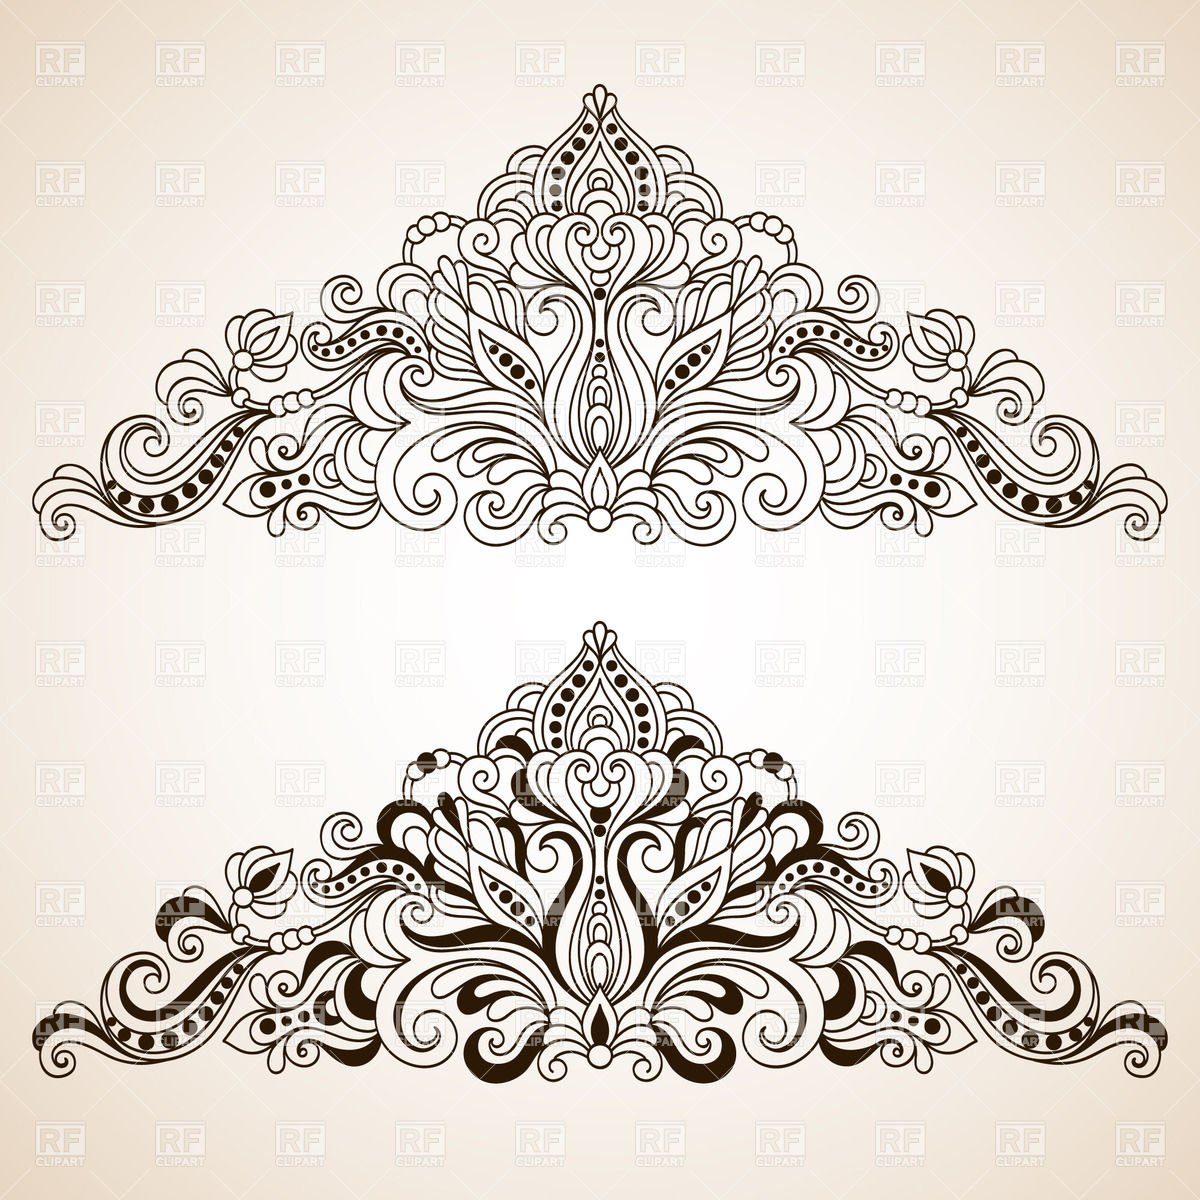 Ornate Border Elements 29377 Download Royalty Free Vector Clipart